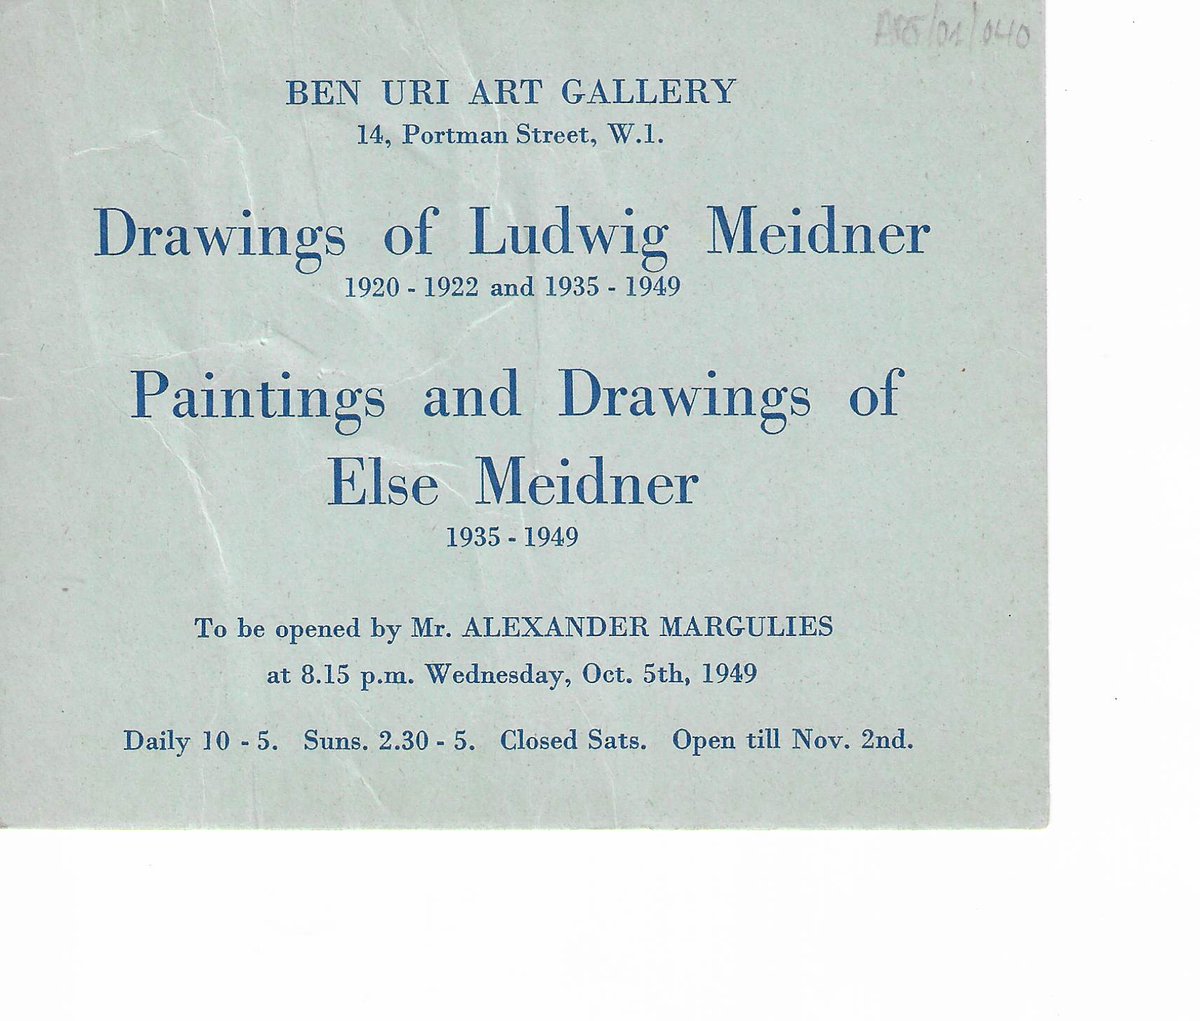 Find out more on the exhibition “Ludwig Meidner, Drawings 1920-1922 and 1935-49, and Else Meidner, Paintings and Drawings 1935-49” here: bit.ly/3Il9jVE #benuricollection #benurigallery #benuriexhibition